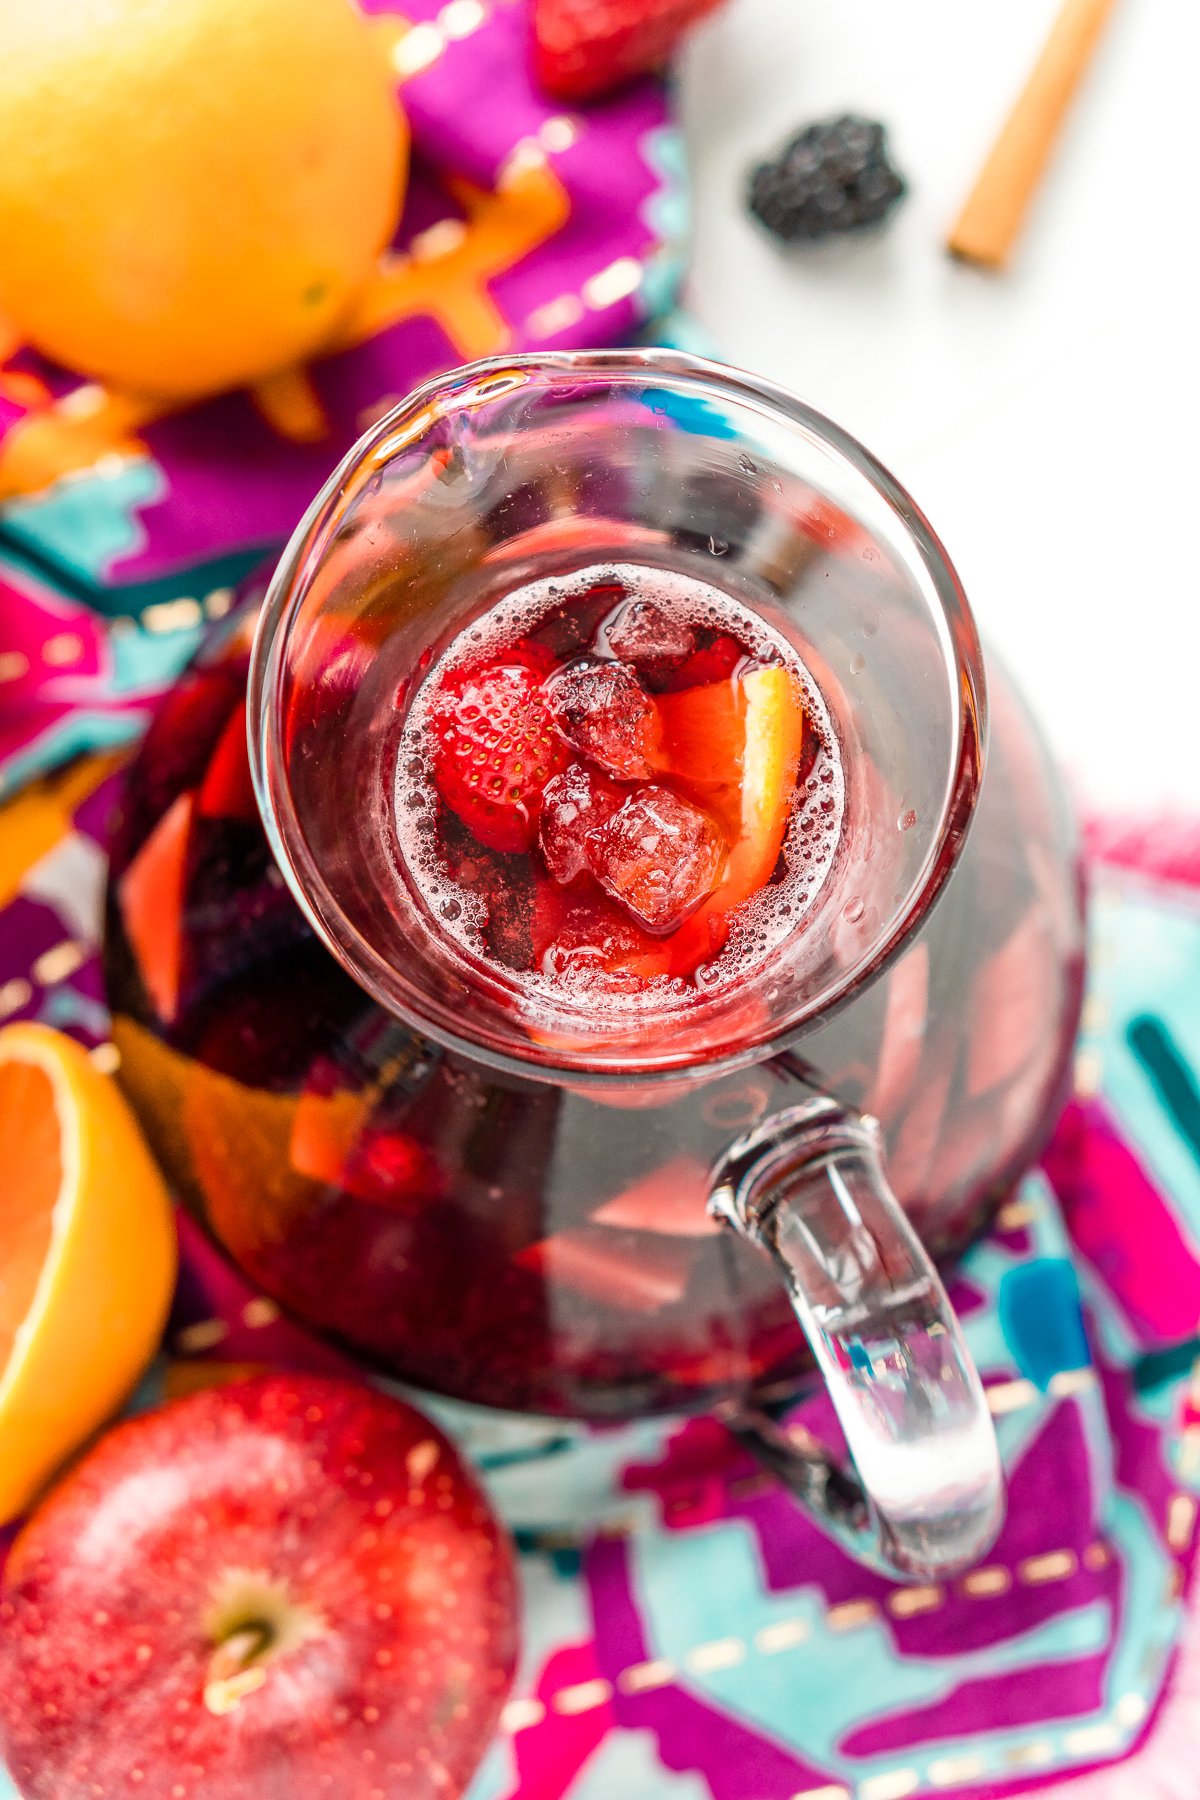 Overhead photo of a pitcher filled with red sangria made with apples, blackberries, oranges, and strawberries.